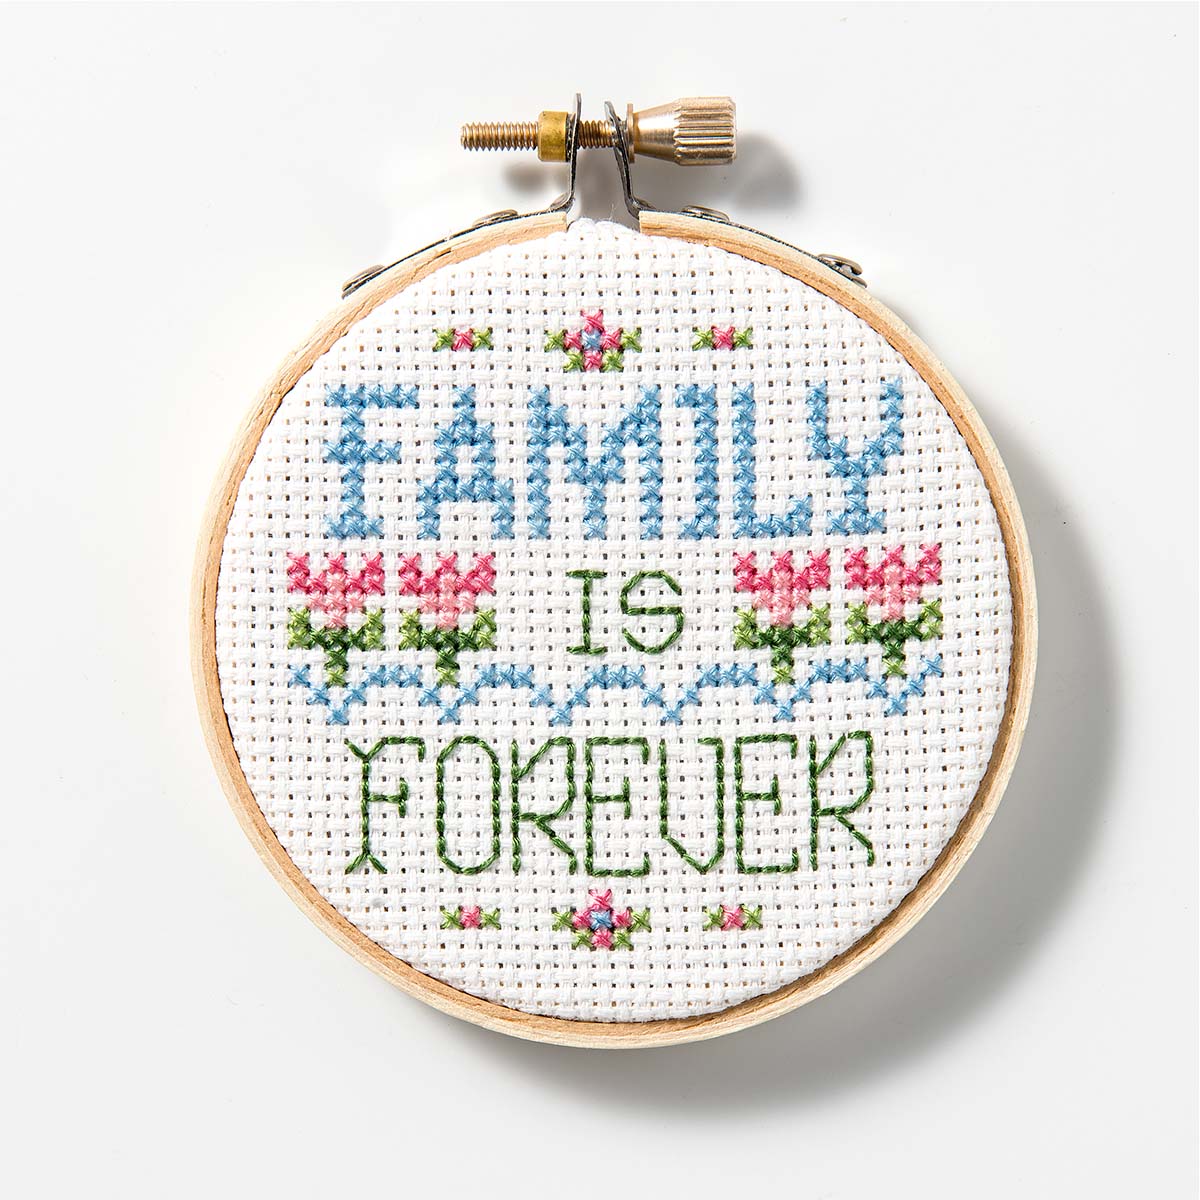 Counted Cross Stitch Kit, This Took Forever